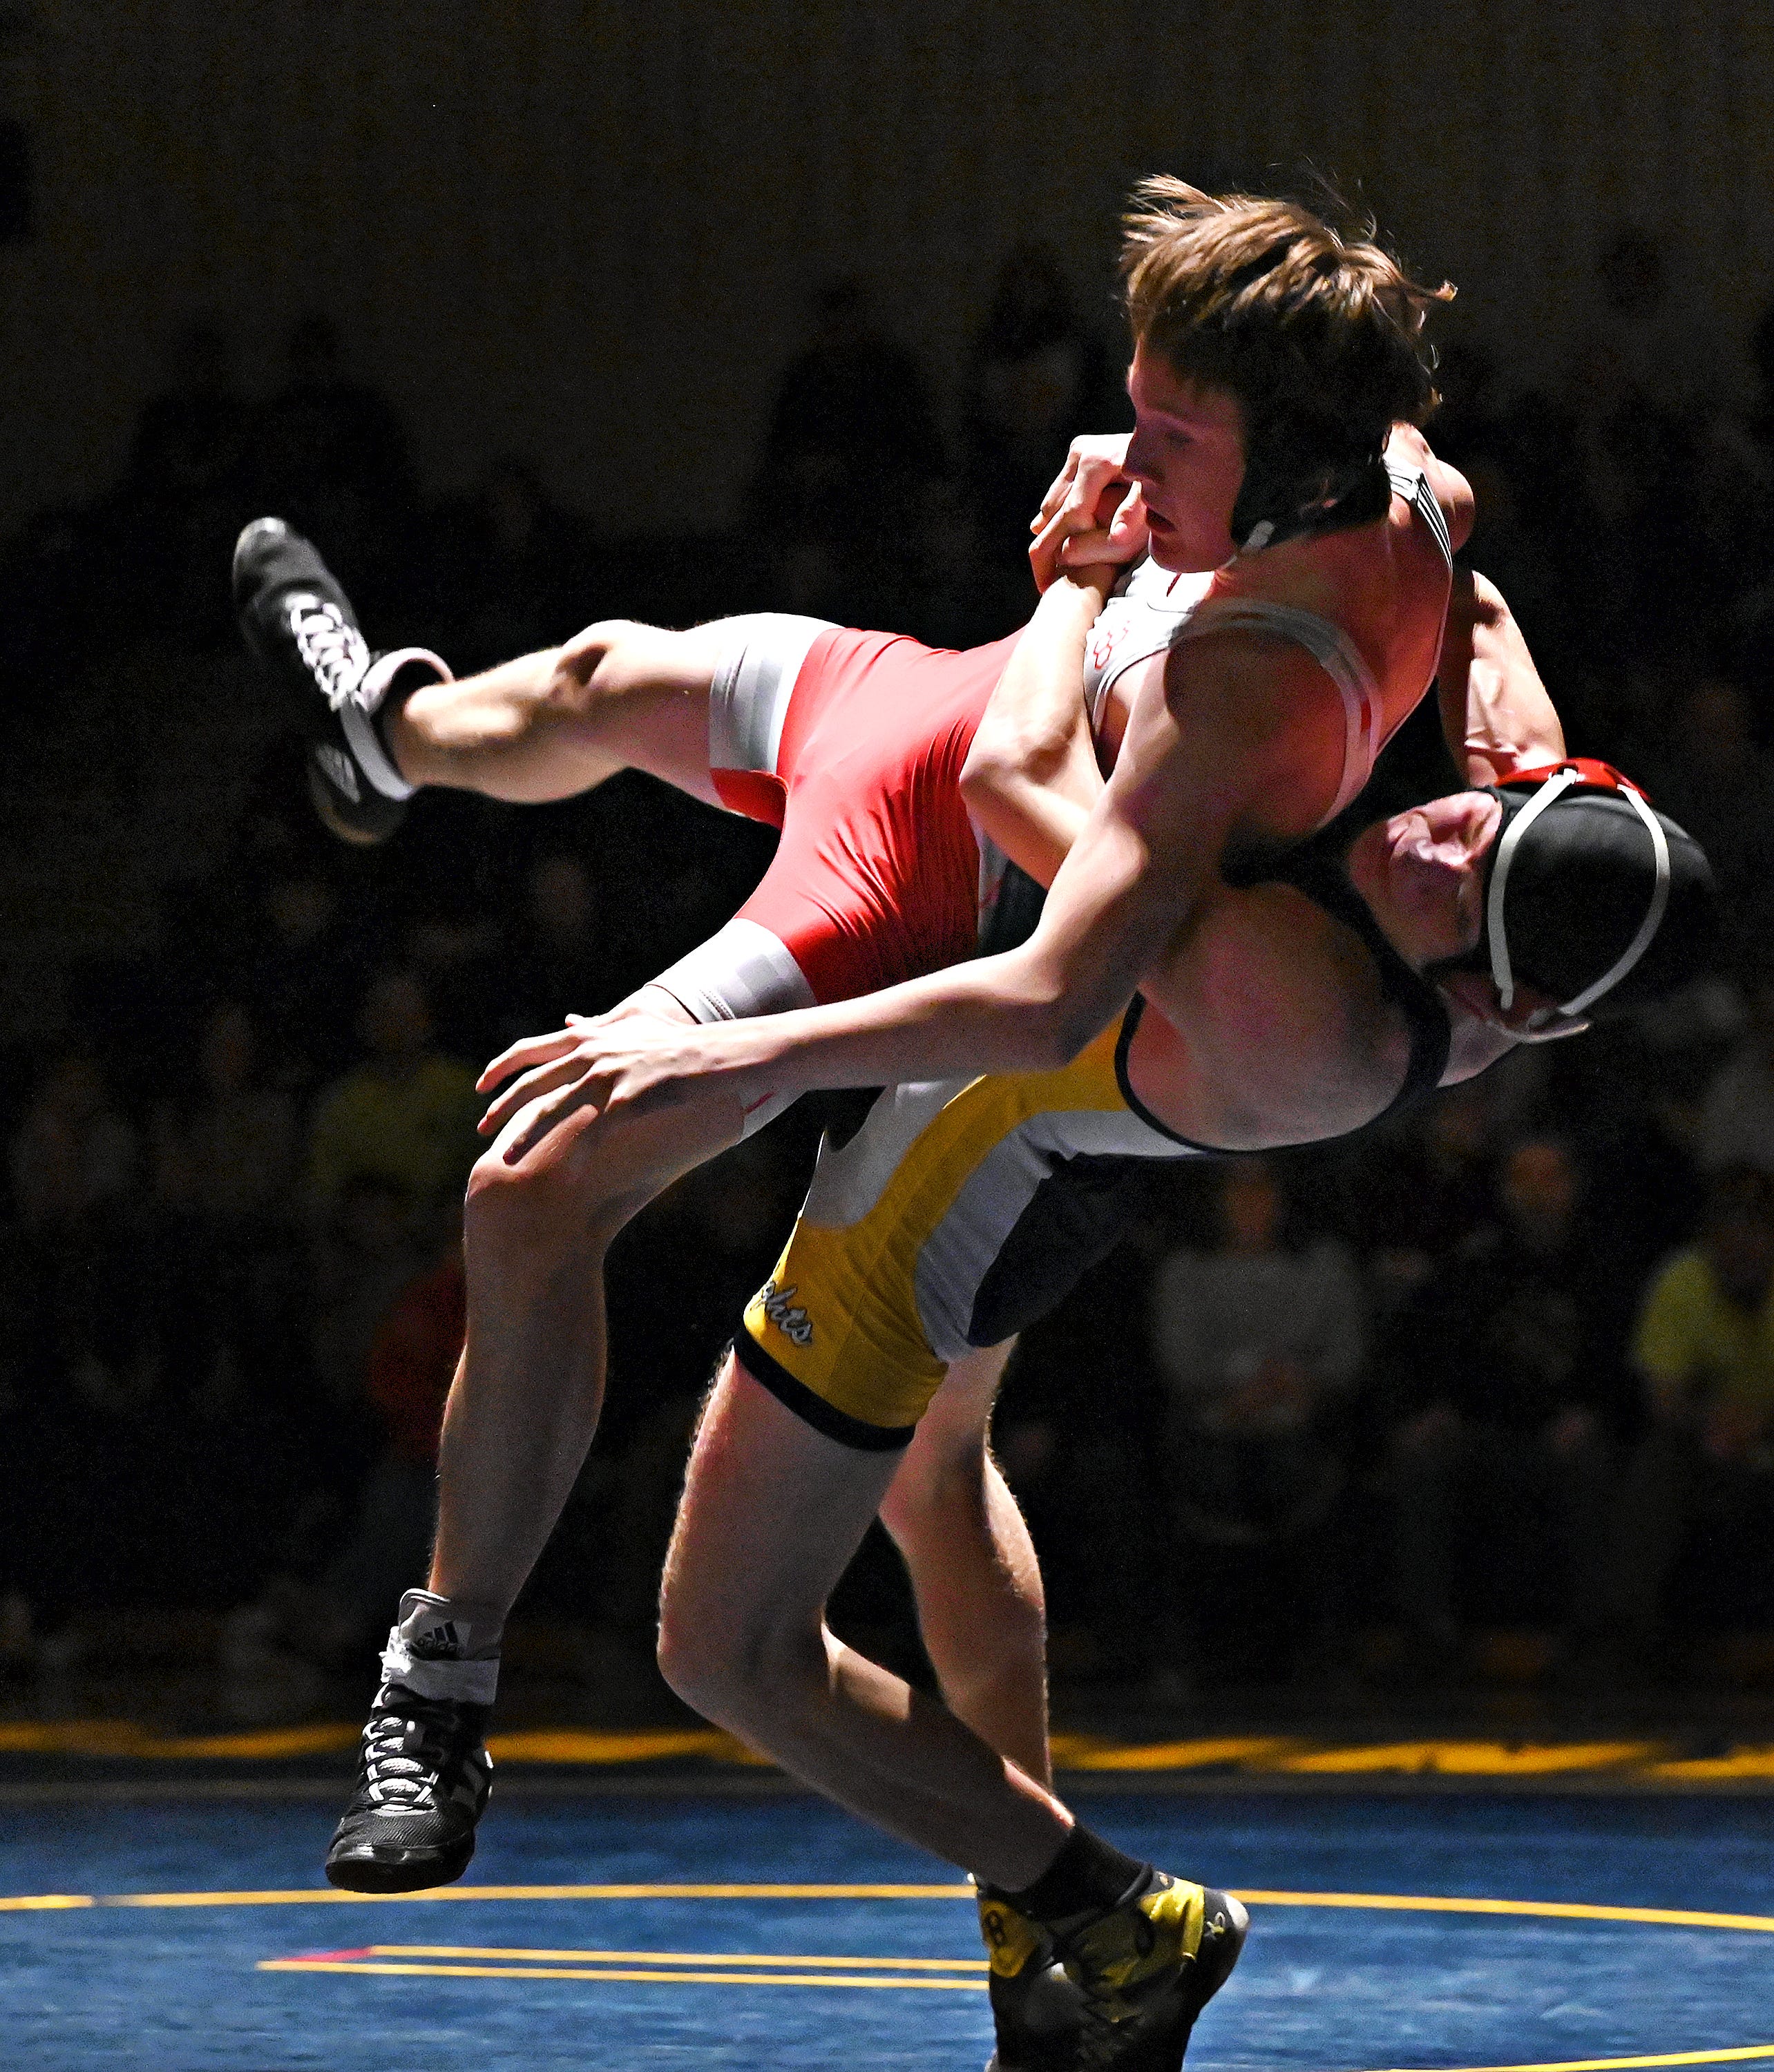 Eastern York’s Logan Crean, back, and Hamburg’s Owen Thebeau compete in the 145-pound weight class during PIAA District 3, Class 2-A first round wrestling action at Eastern York High School in Lower Windsor Township, Monday, Jan. 30, 2023. Crean would win the match with a pin at 0:48 and Eastern York would win the meet 50-22. Dawn J. Sagert photo